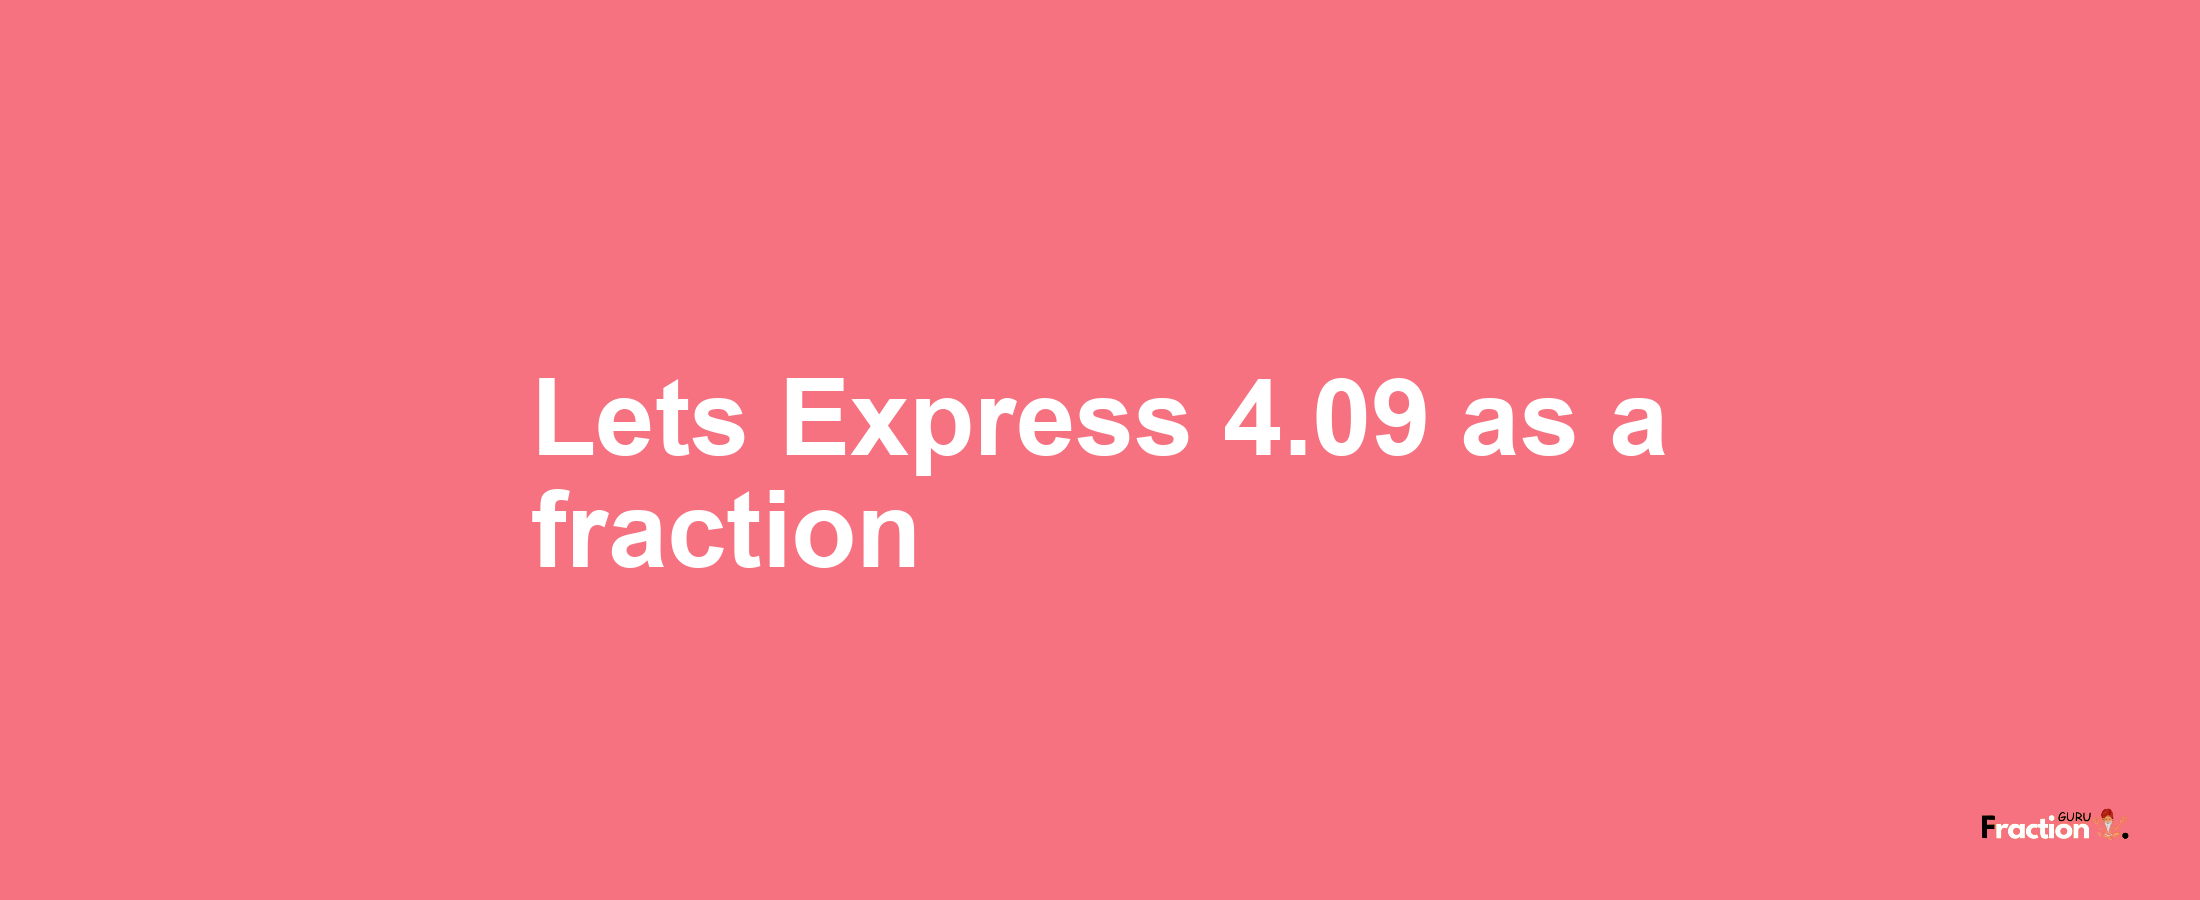 Lets Express 4.09 as afraction